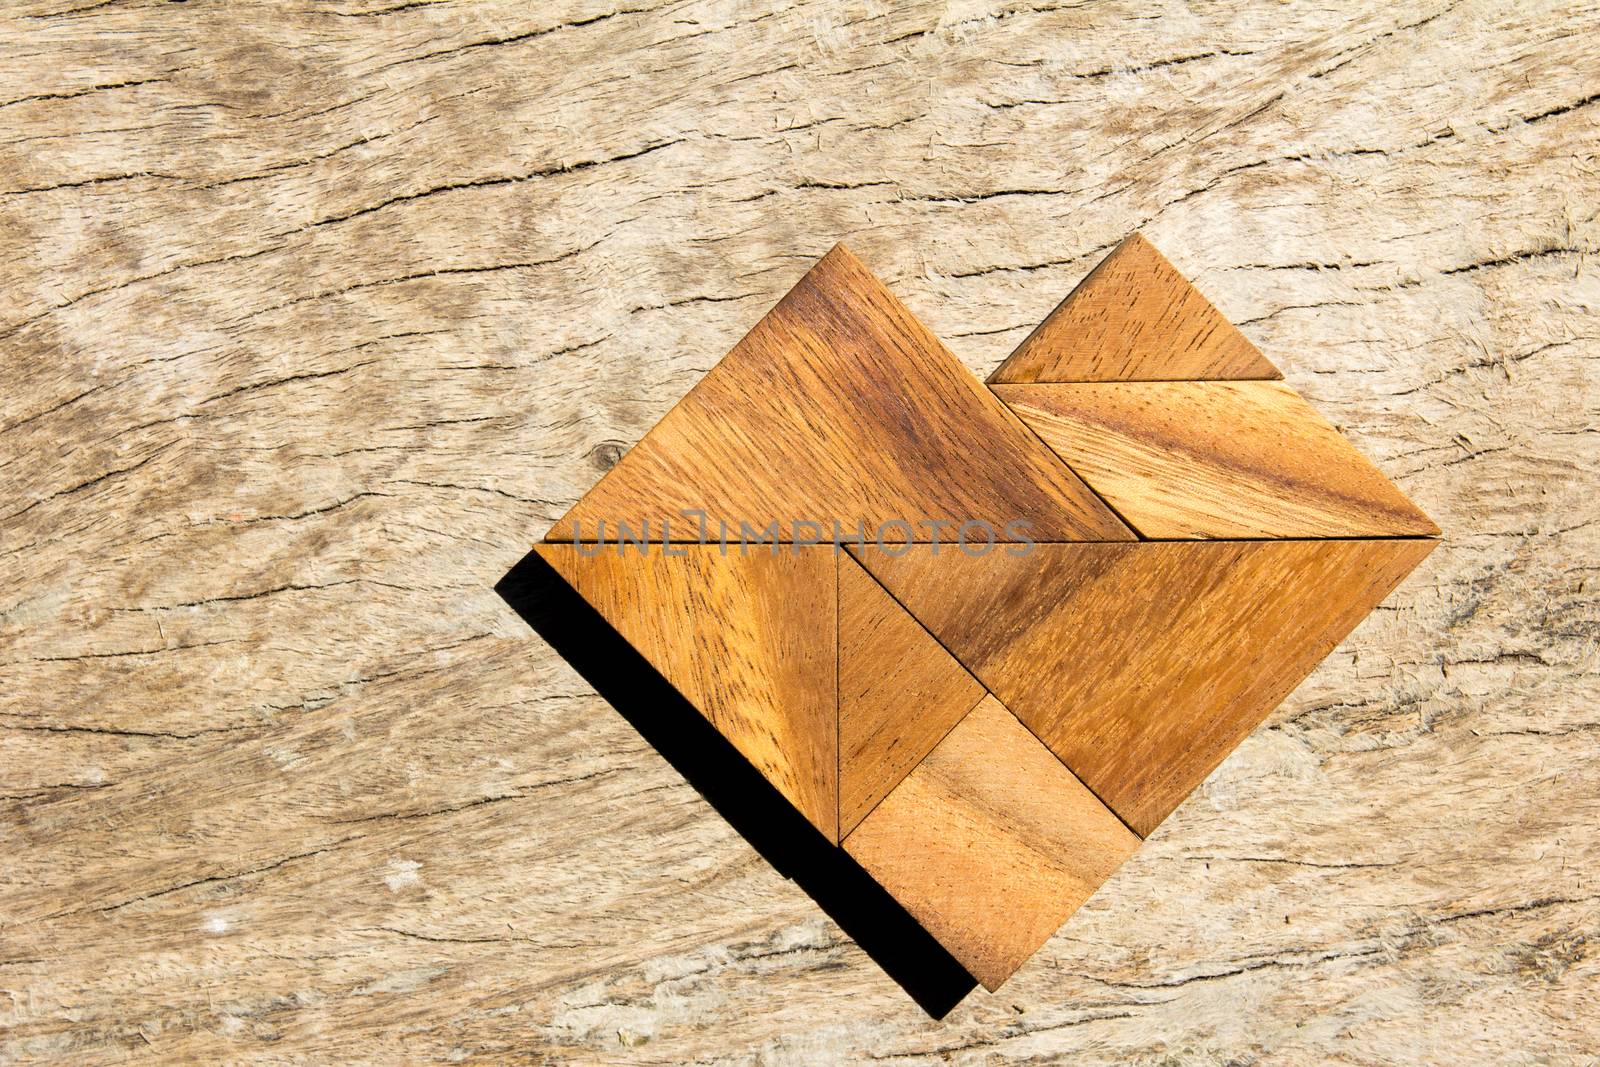 Tangram puzzle in heart shape on wooden background